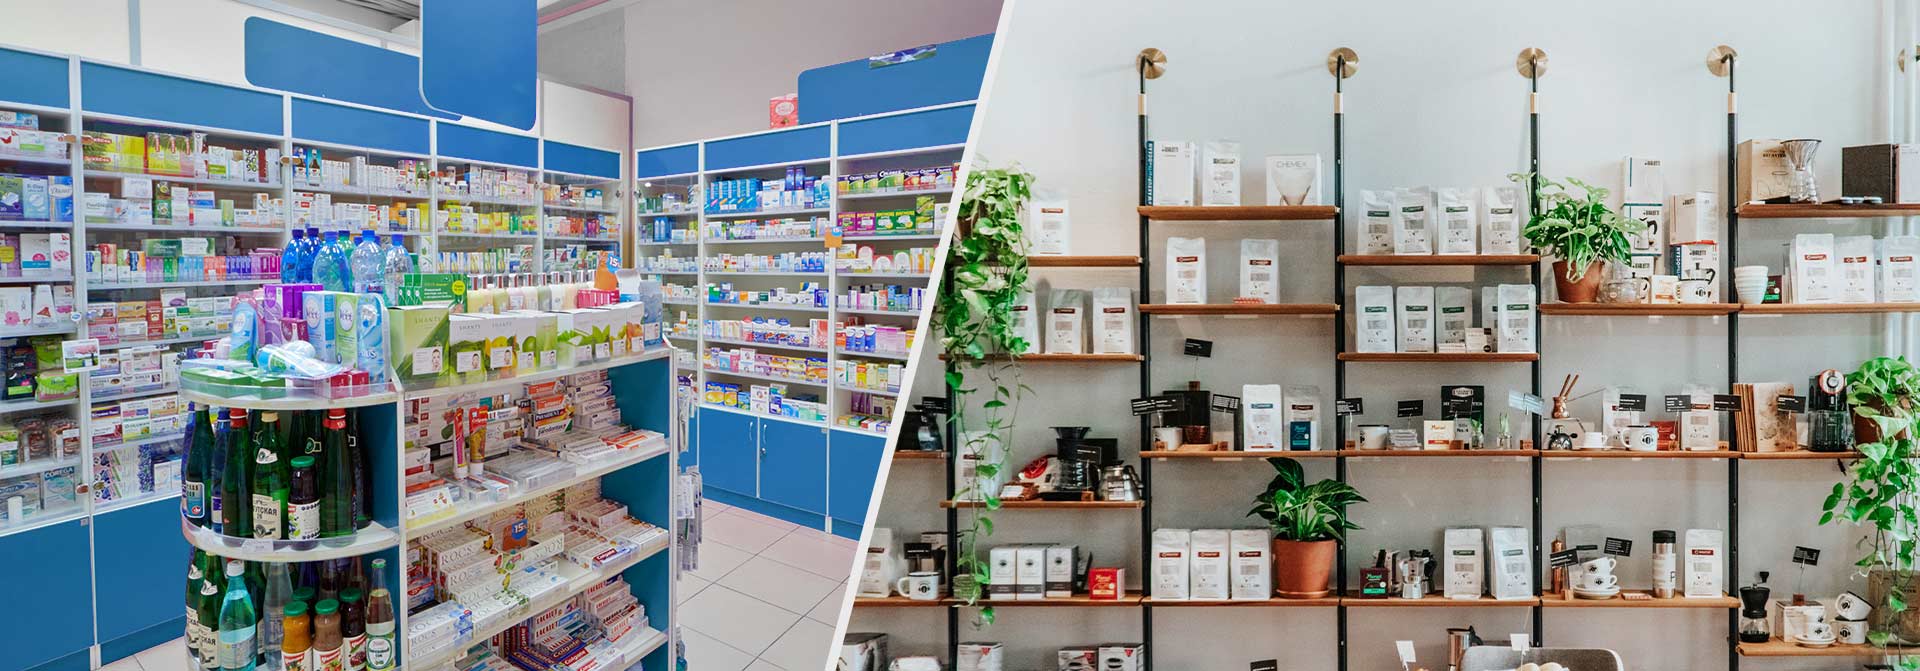 Comparison of pharmacy design old and modern styles